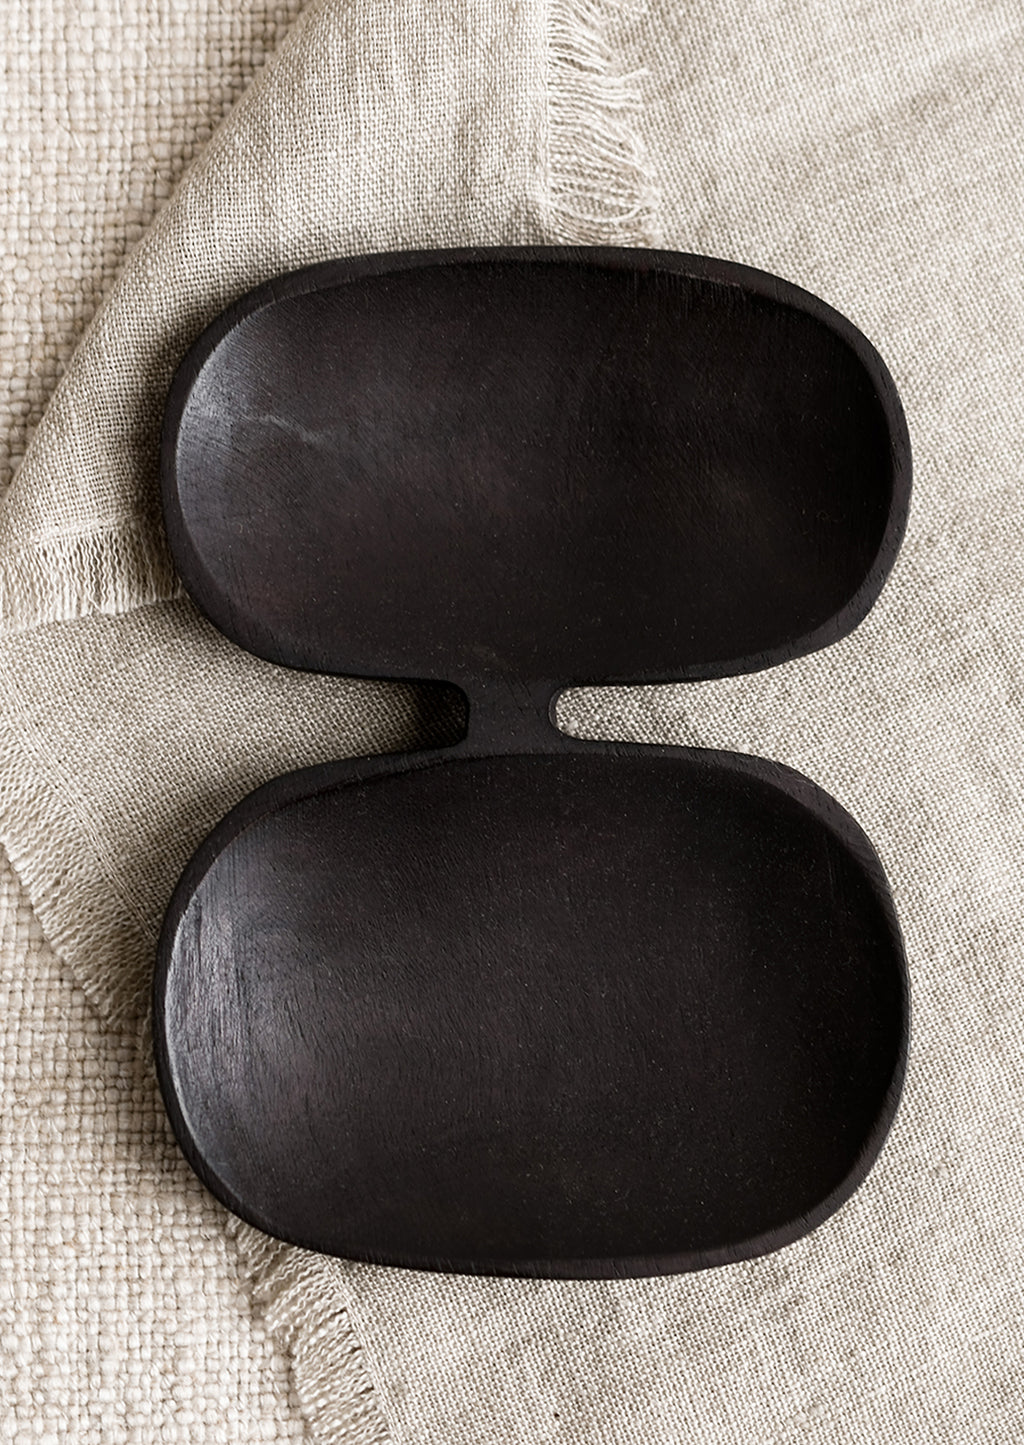 Large: A double wide wooden dish with mirrored oval shape in blackened wood.